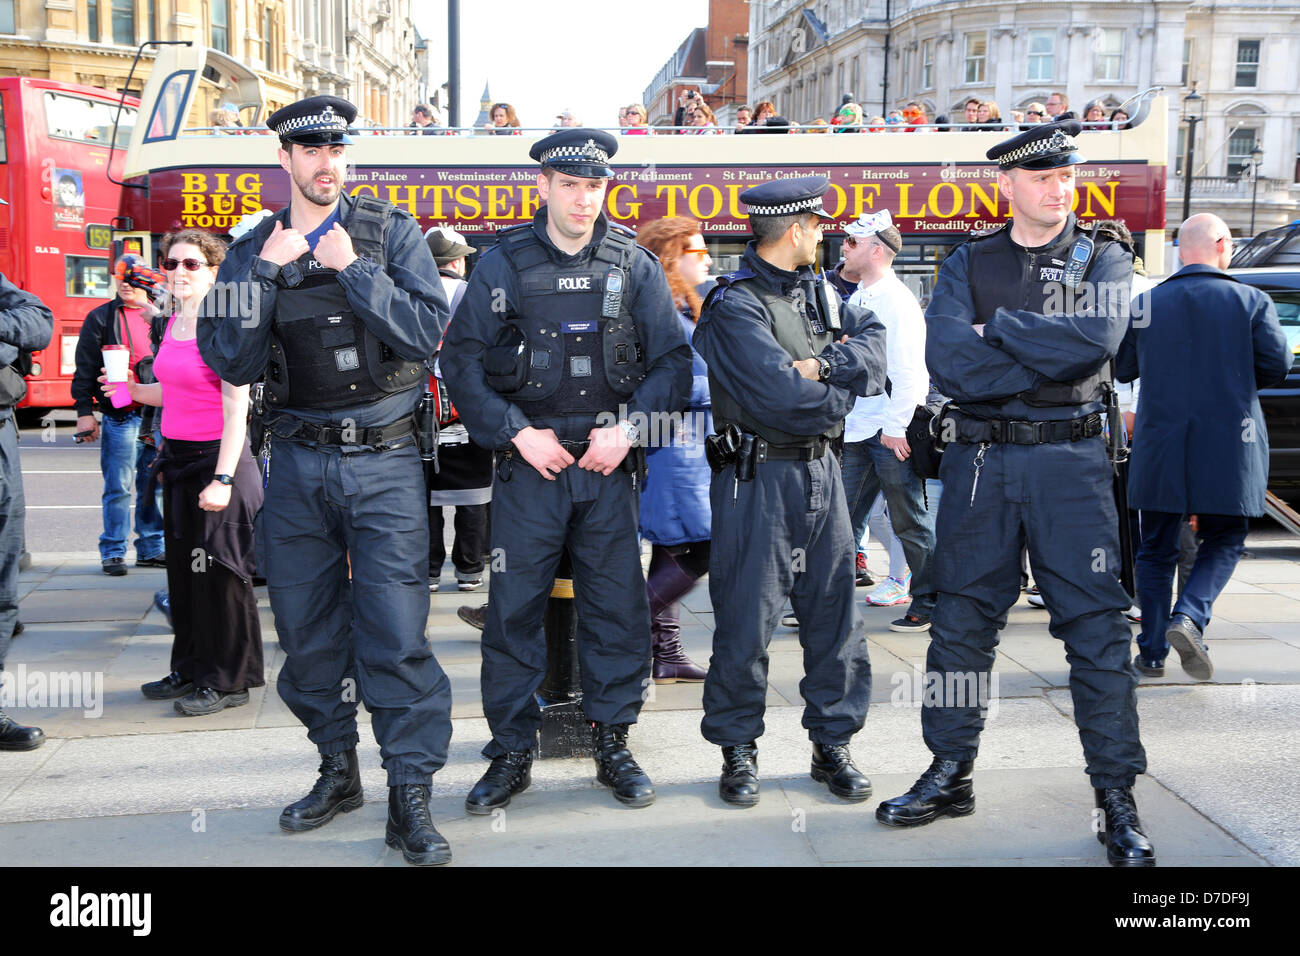 London, UK. 4th May 2013. Police at the Anonymous UK anti-austerity demonstration, London, England. Credit:  Paul Brown / Alamy Live News Stock Photo